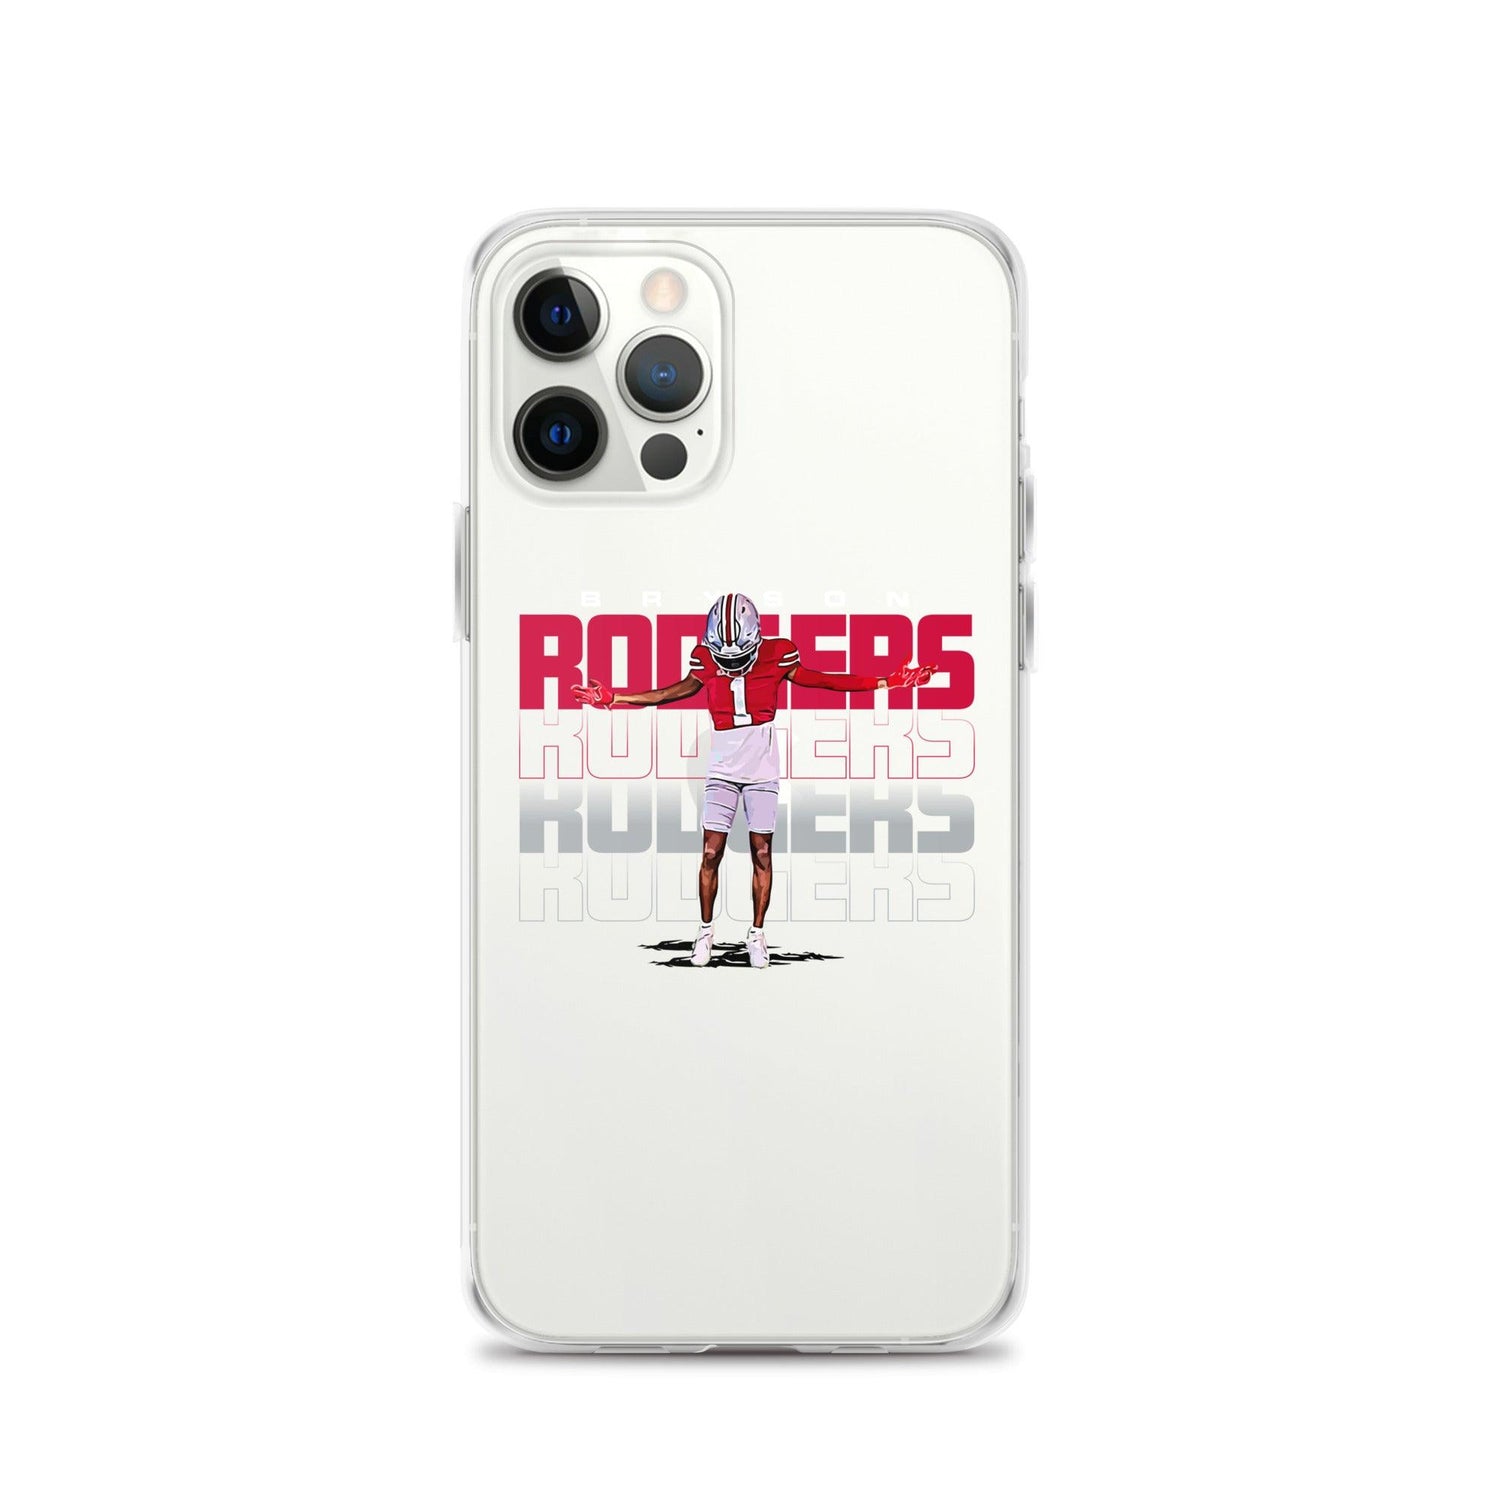 Bryson Rodgers "Gameday" iPhone Case - Fan Arch